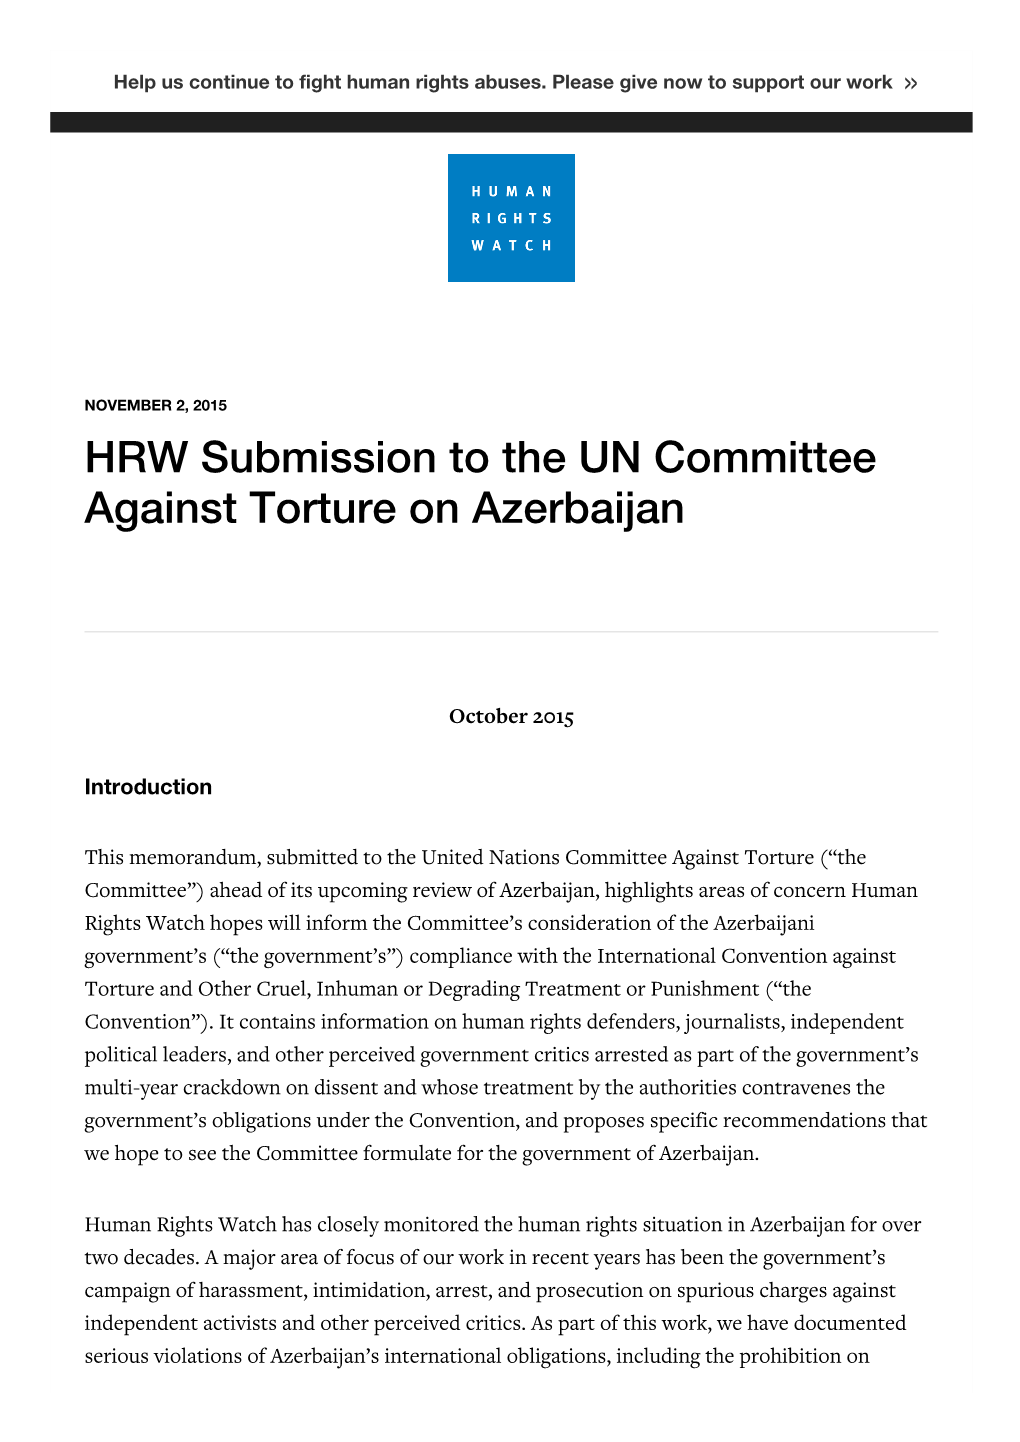 HRW Submission to the UN Committee Against Torture on Azerbaijan